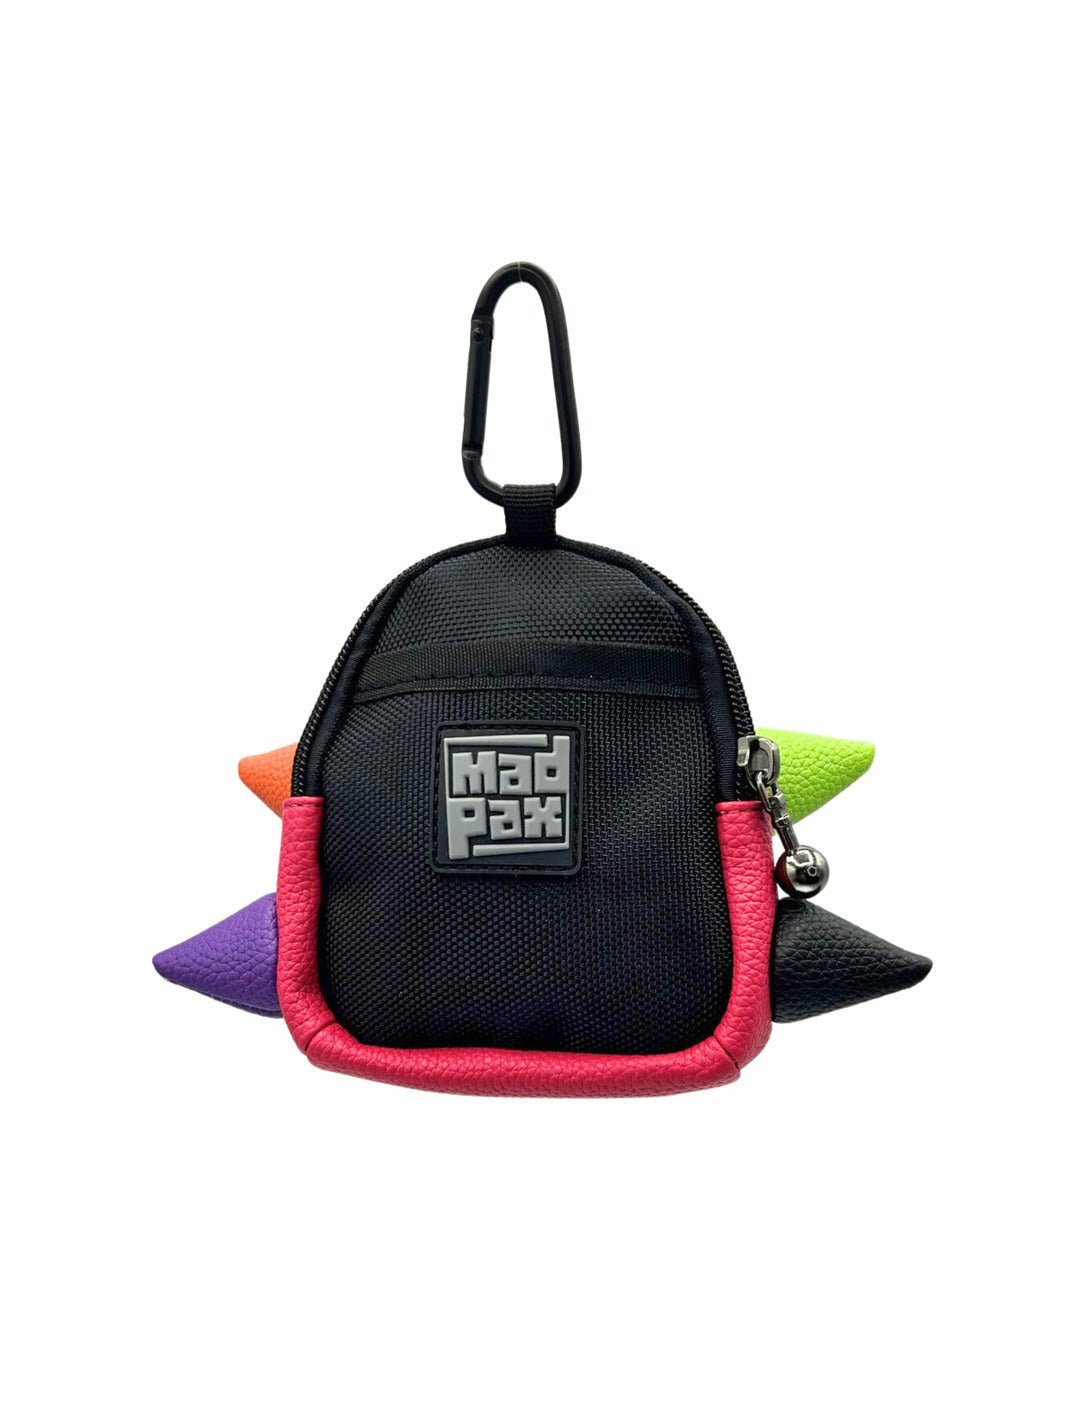 Streamers - Clip On Bag - Madpax